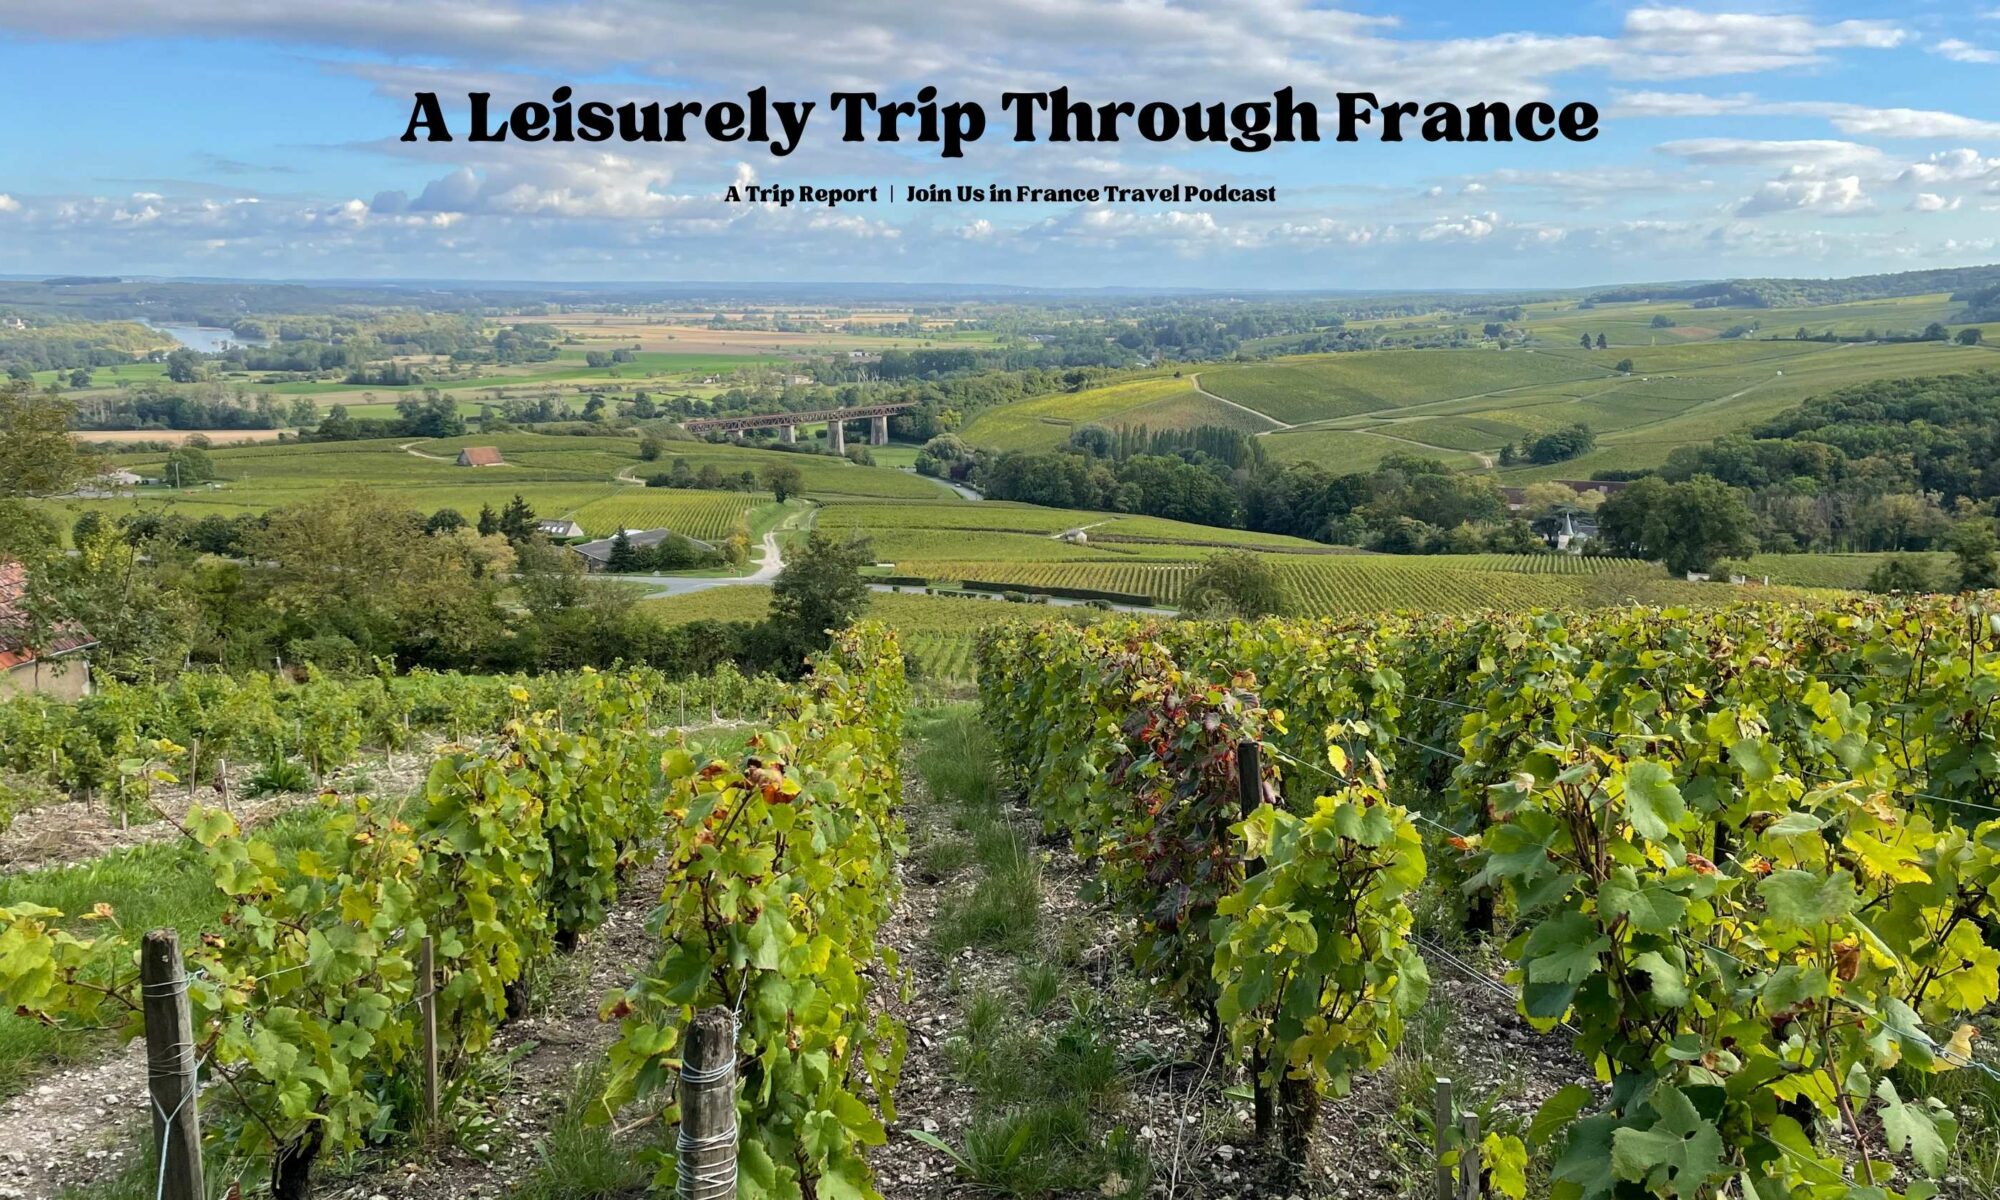 A hilly French countryside with a vineyard in the foreground: A Leisurely Trip Through France episode